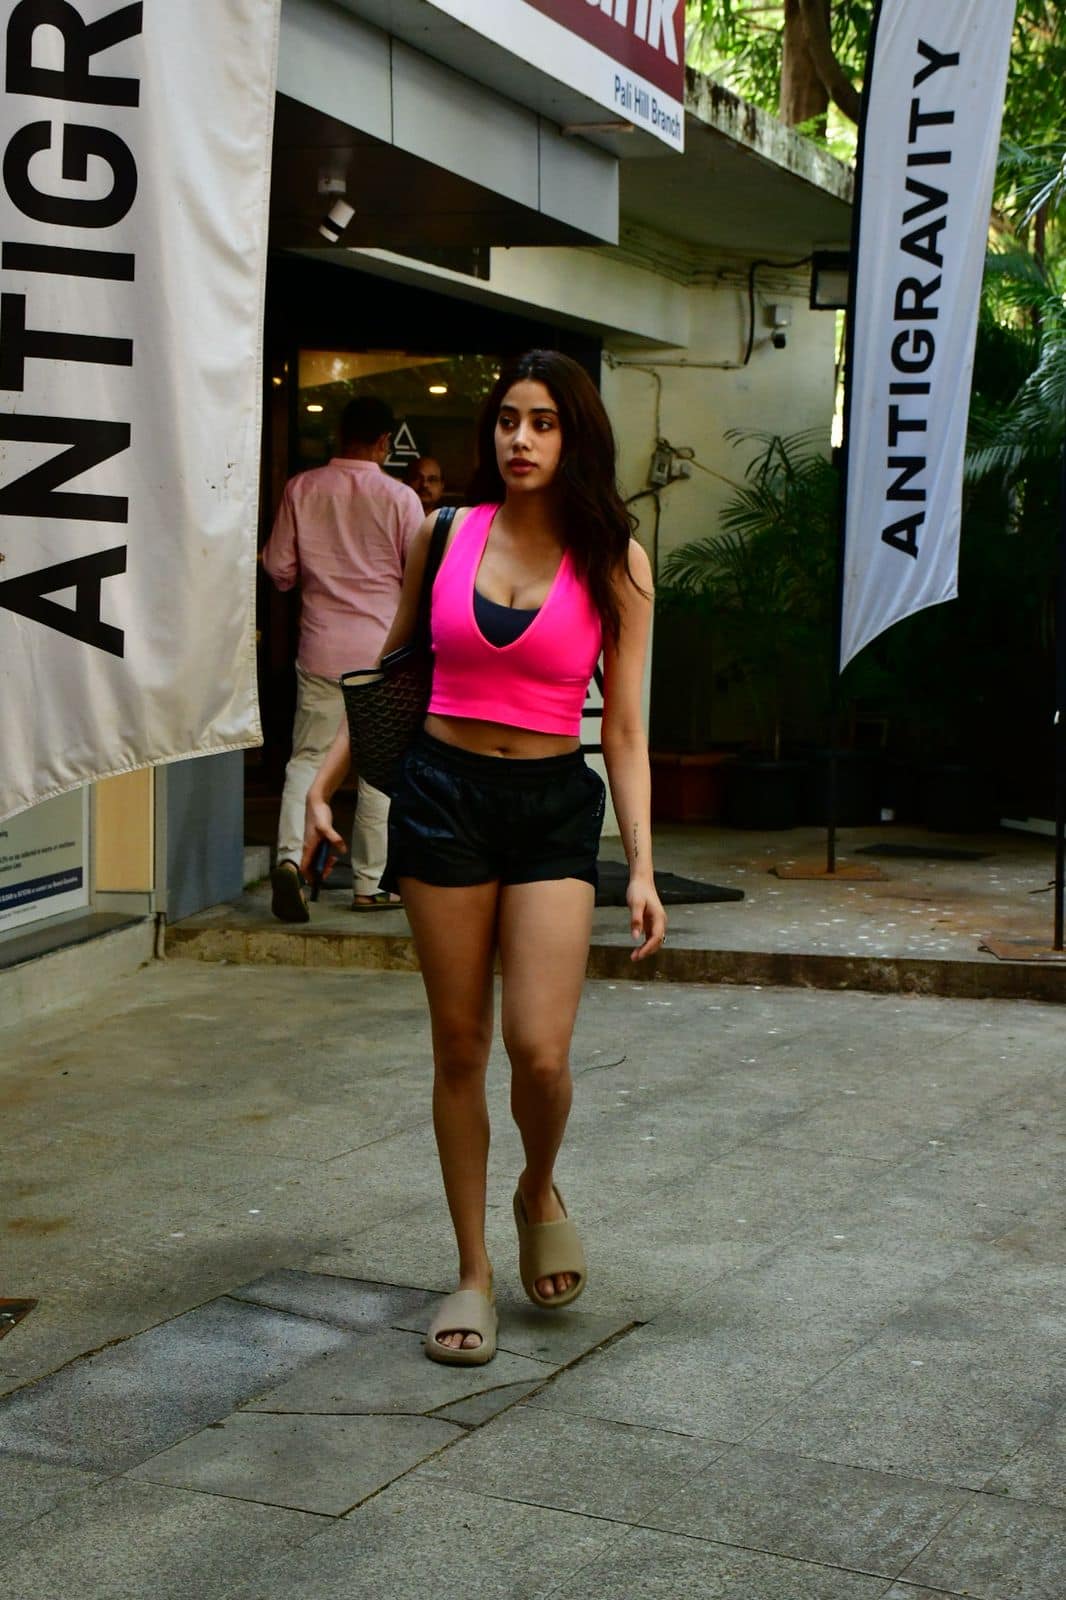 Sported pink and black gym outfit